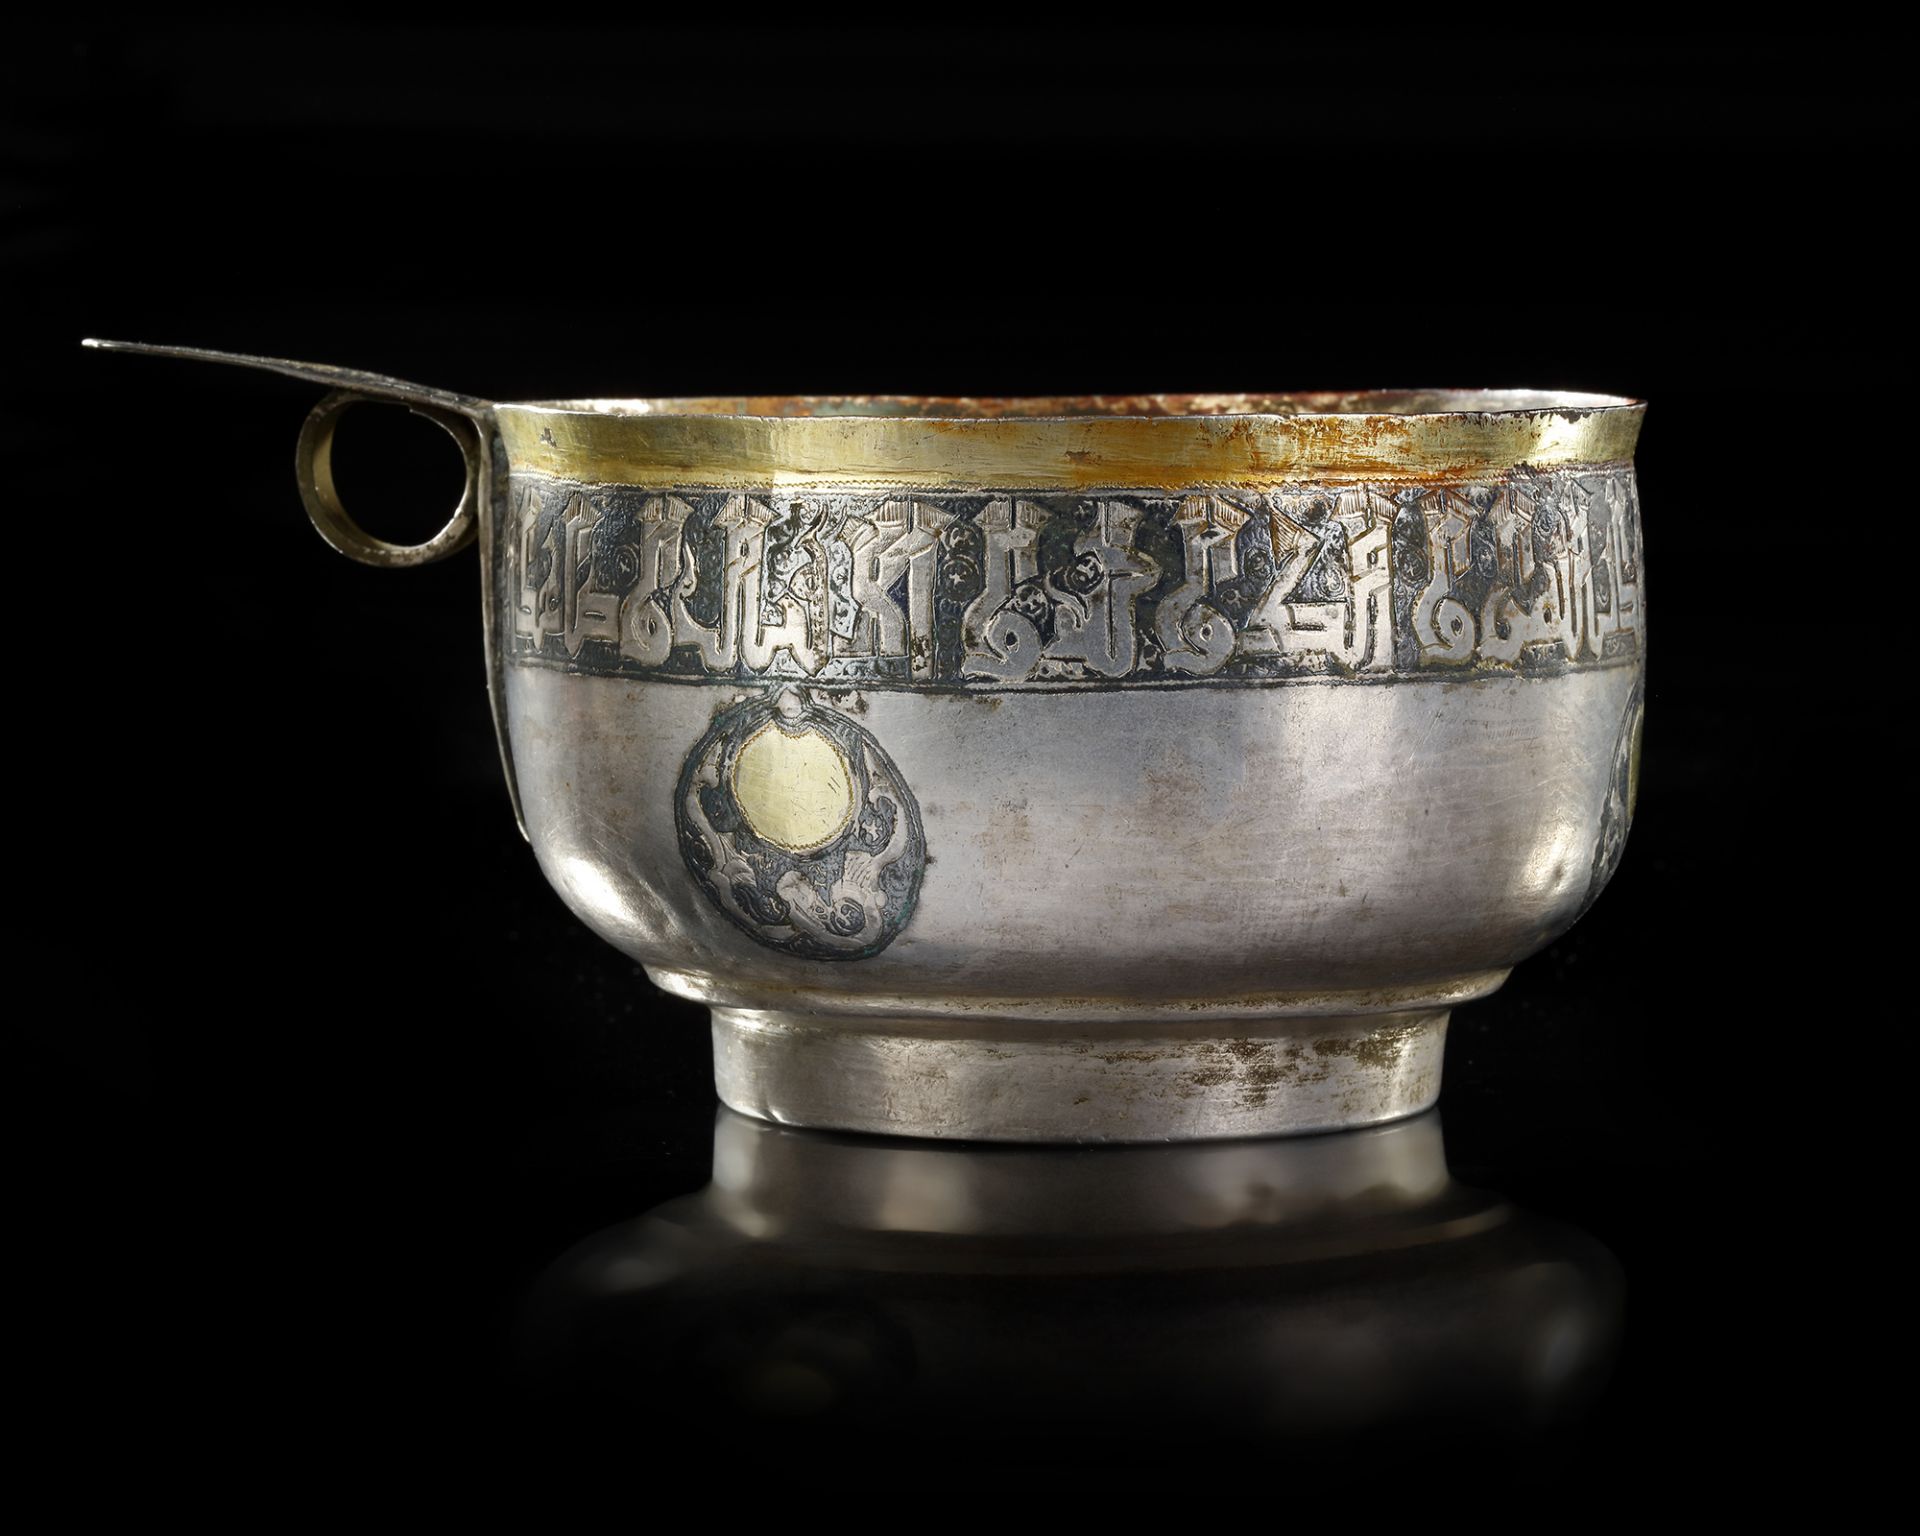 A RARE SILVER AND NIELLOED CUP WITH KUFIC INSCRIPTION, PERSIA OR CENTRAL ASIA, 11TH-12TH CENTURY - Image 11 of 34